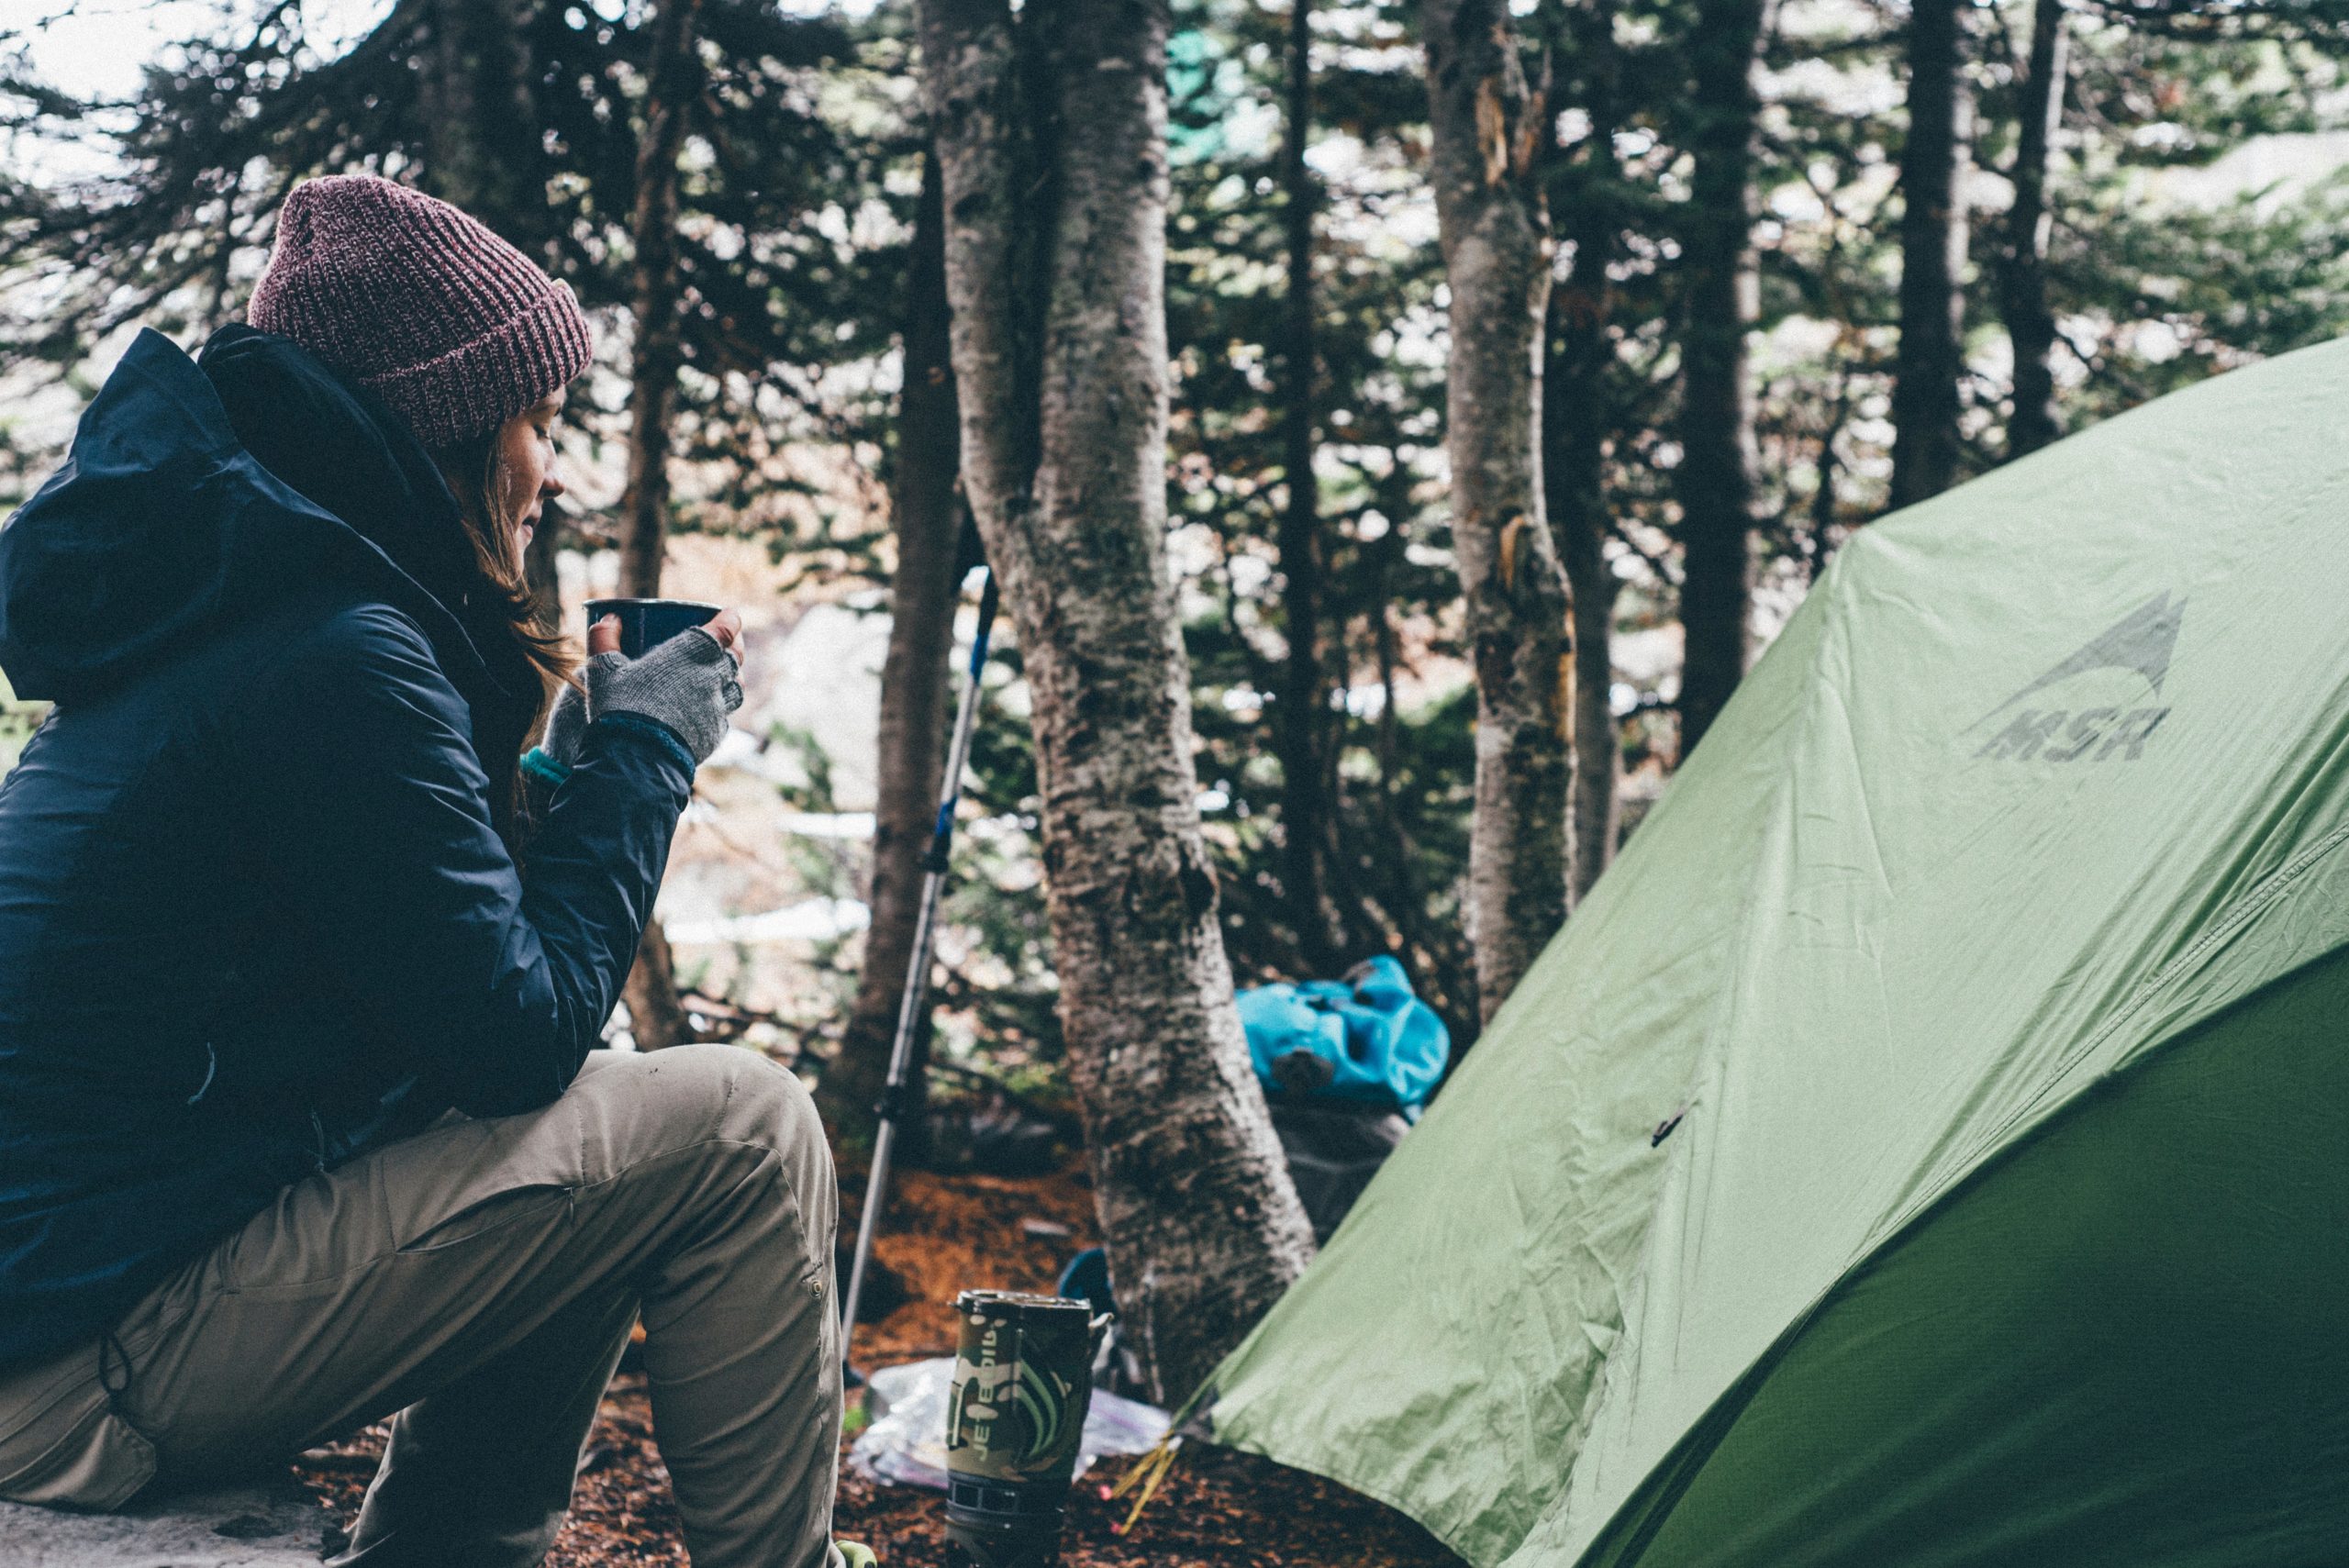 Survival Backpacking: 5 Basic Outdoor Skills to Know